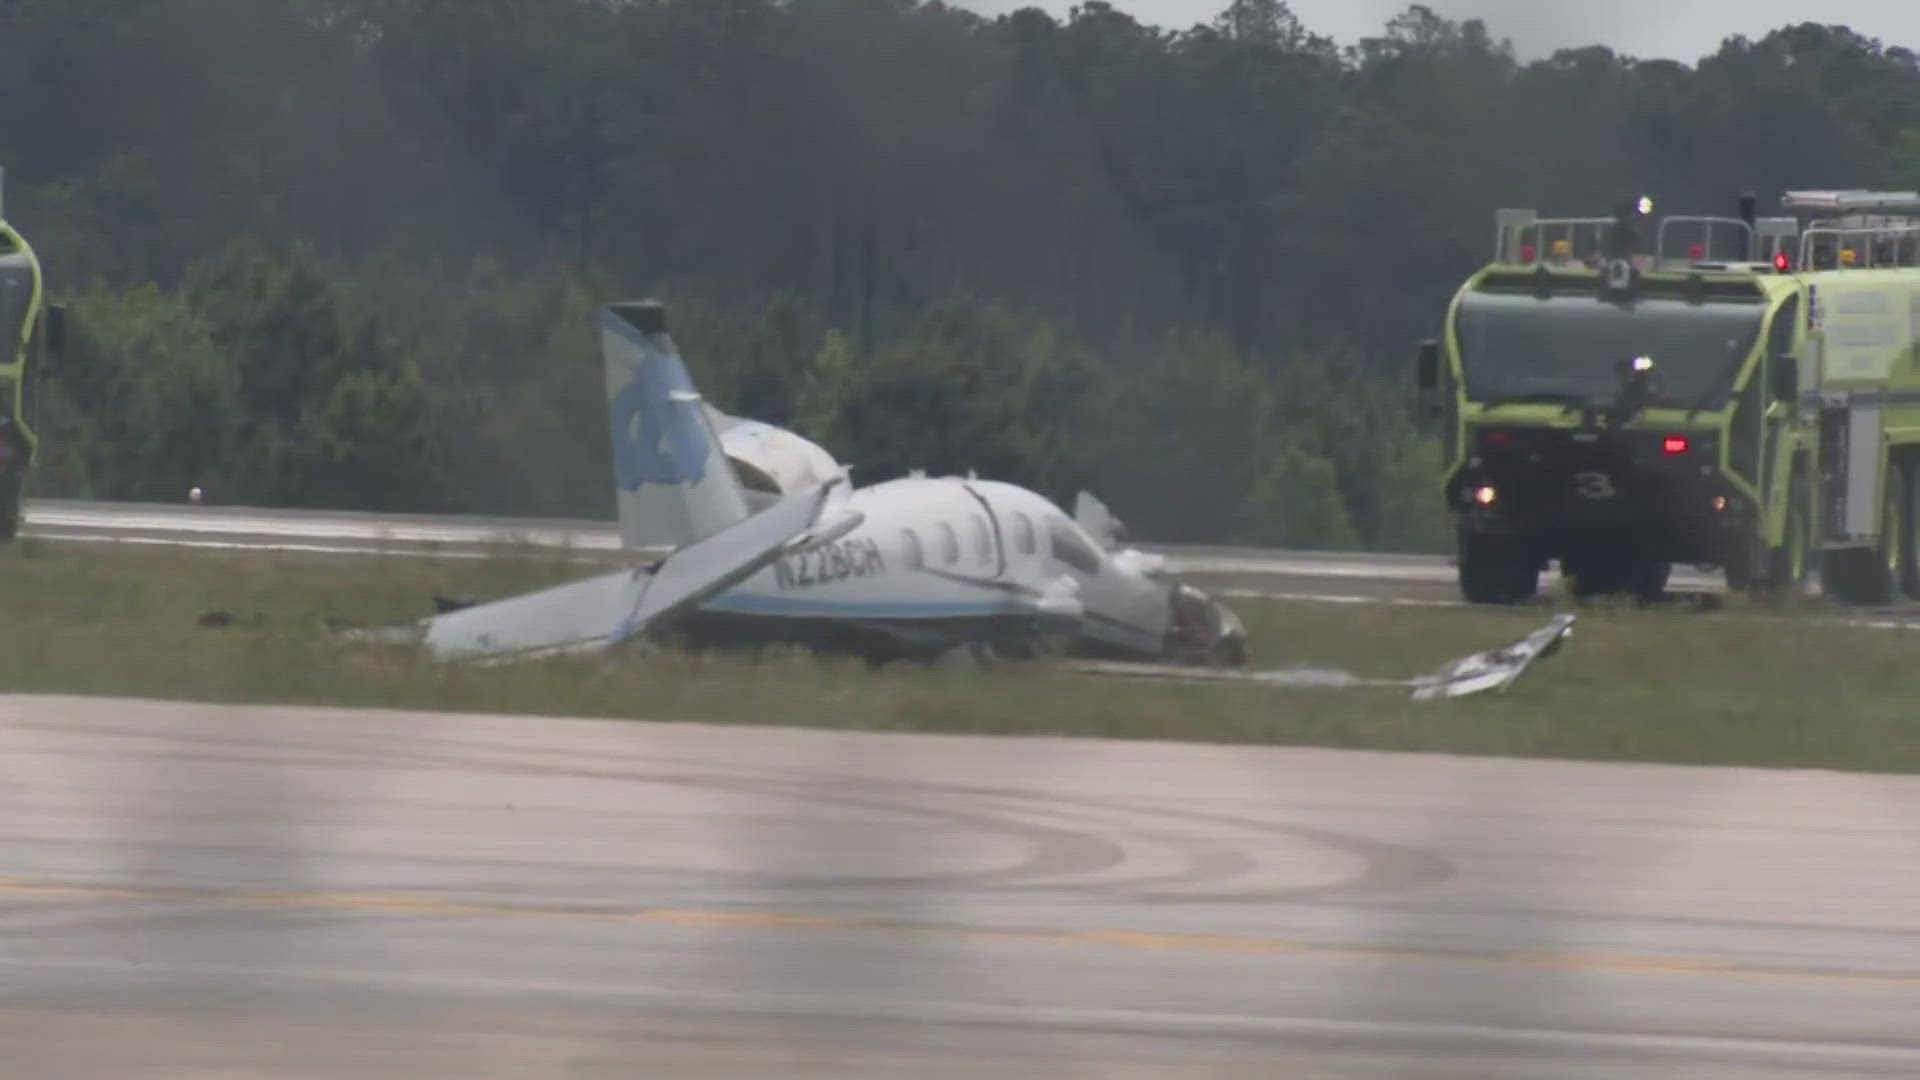 A UNC Health physician and pilot were taken to the hospital Wednesday after a small plane crashed at Raleigh-Durham International Airport (RDU).